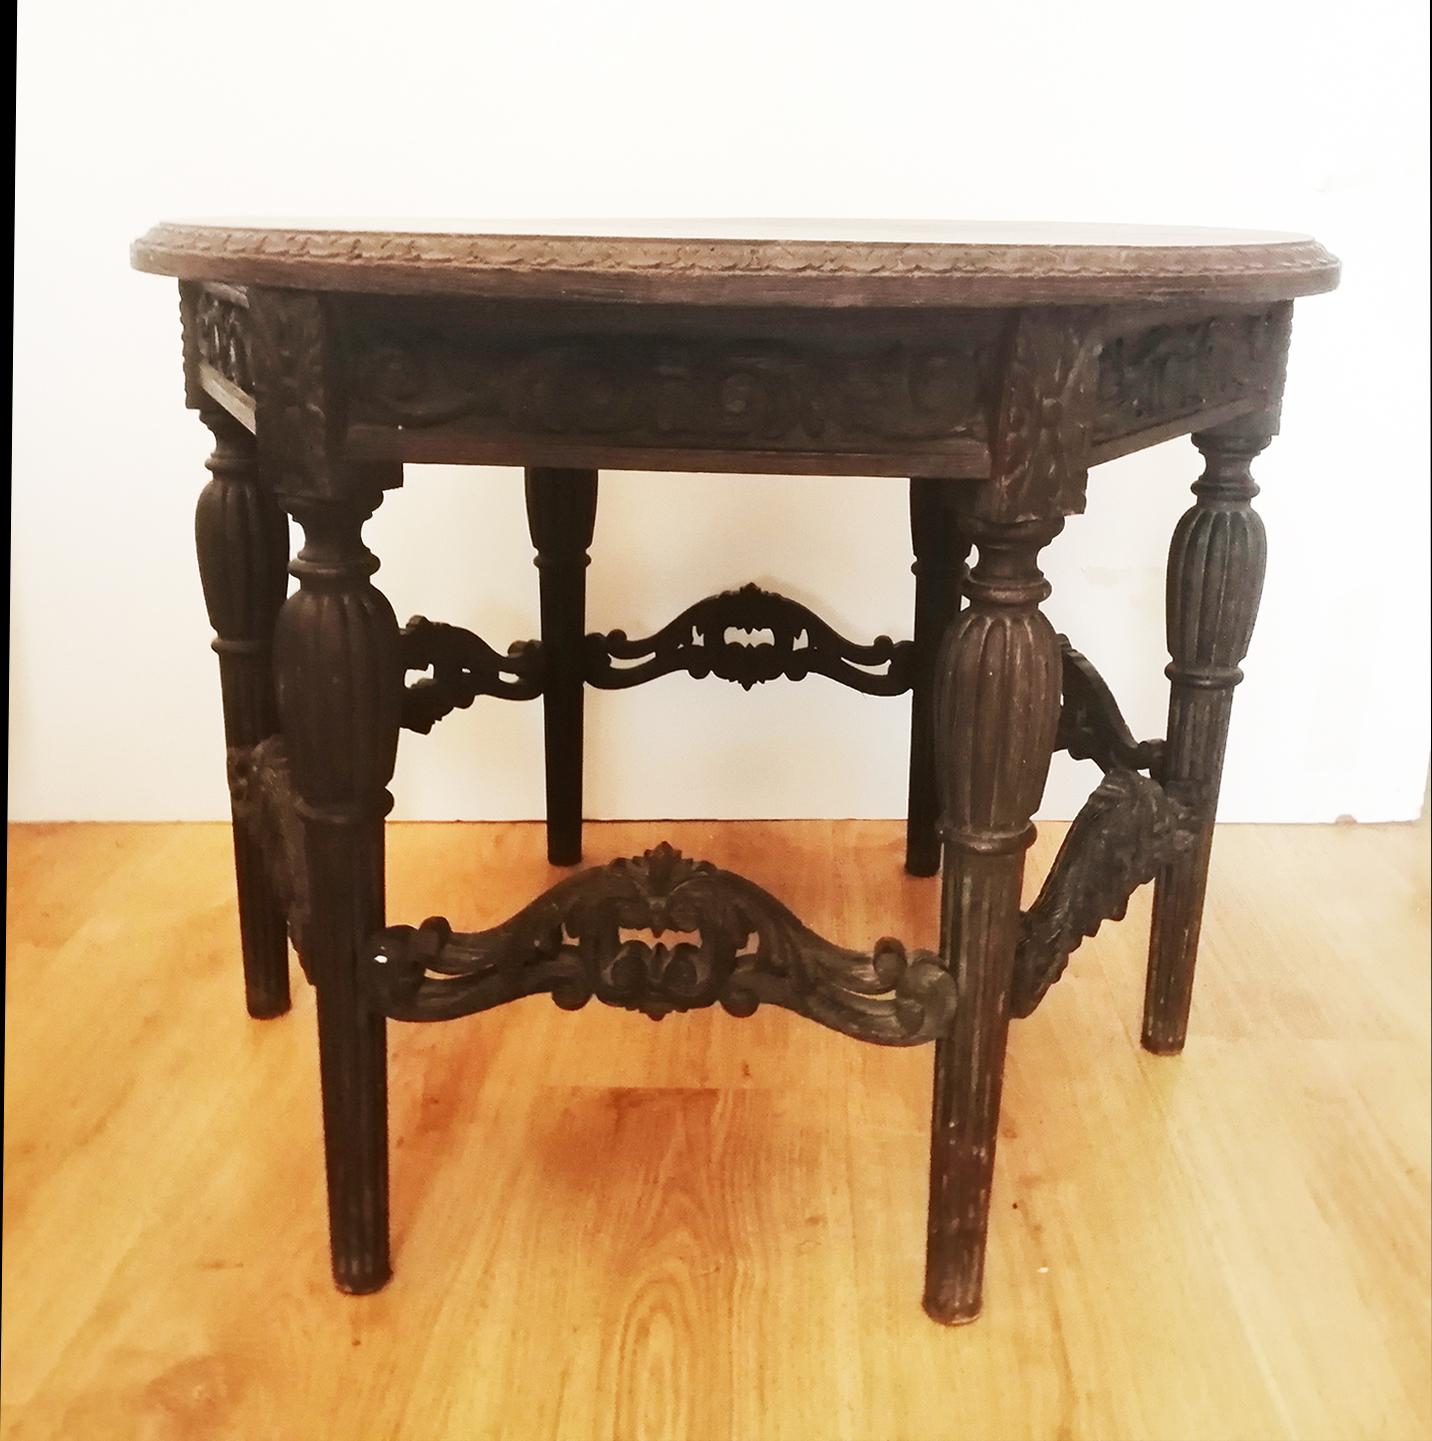 Antique Round Table Renaissance Revival 19th Century In Good Condition For Sale In Mombuey, Zamora